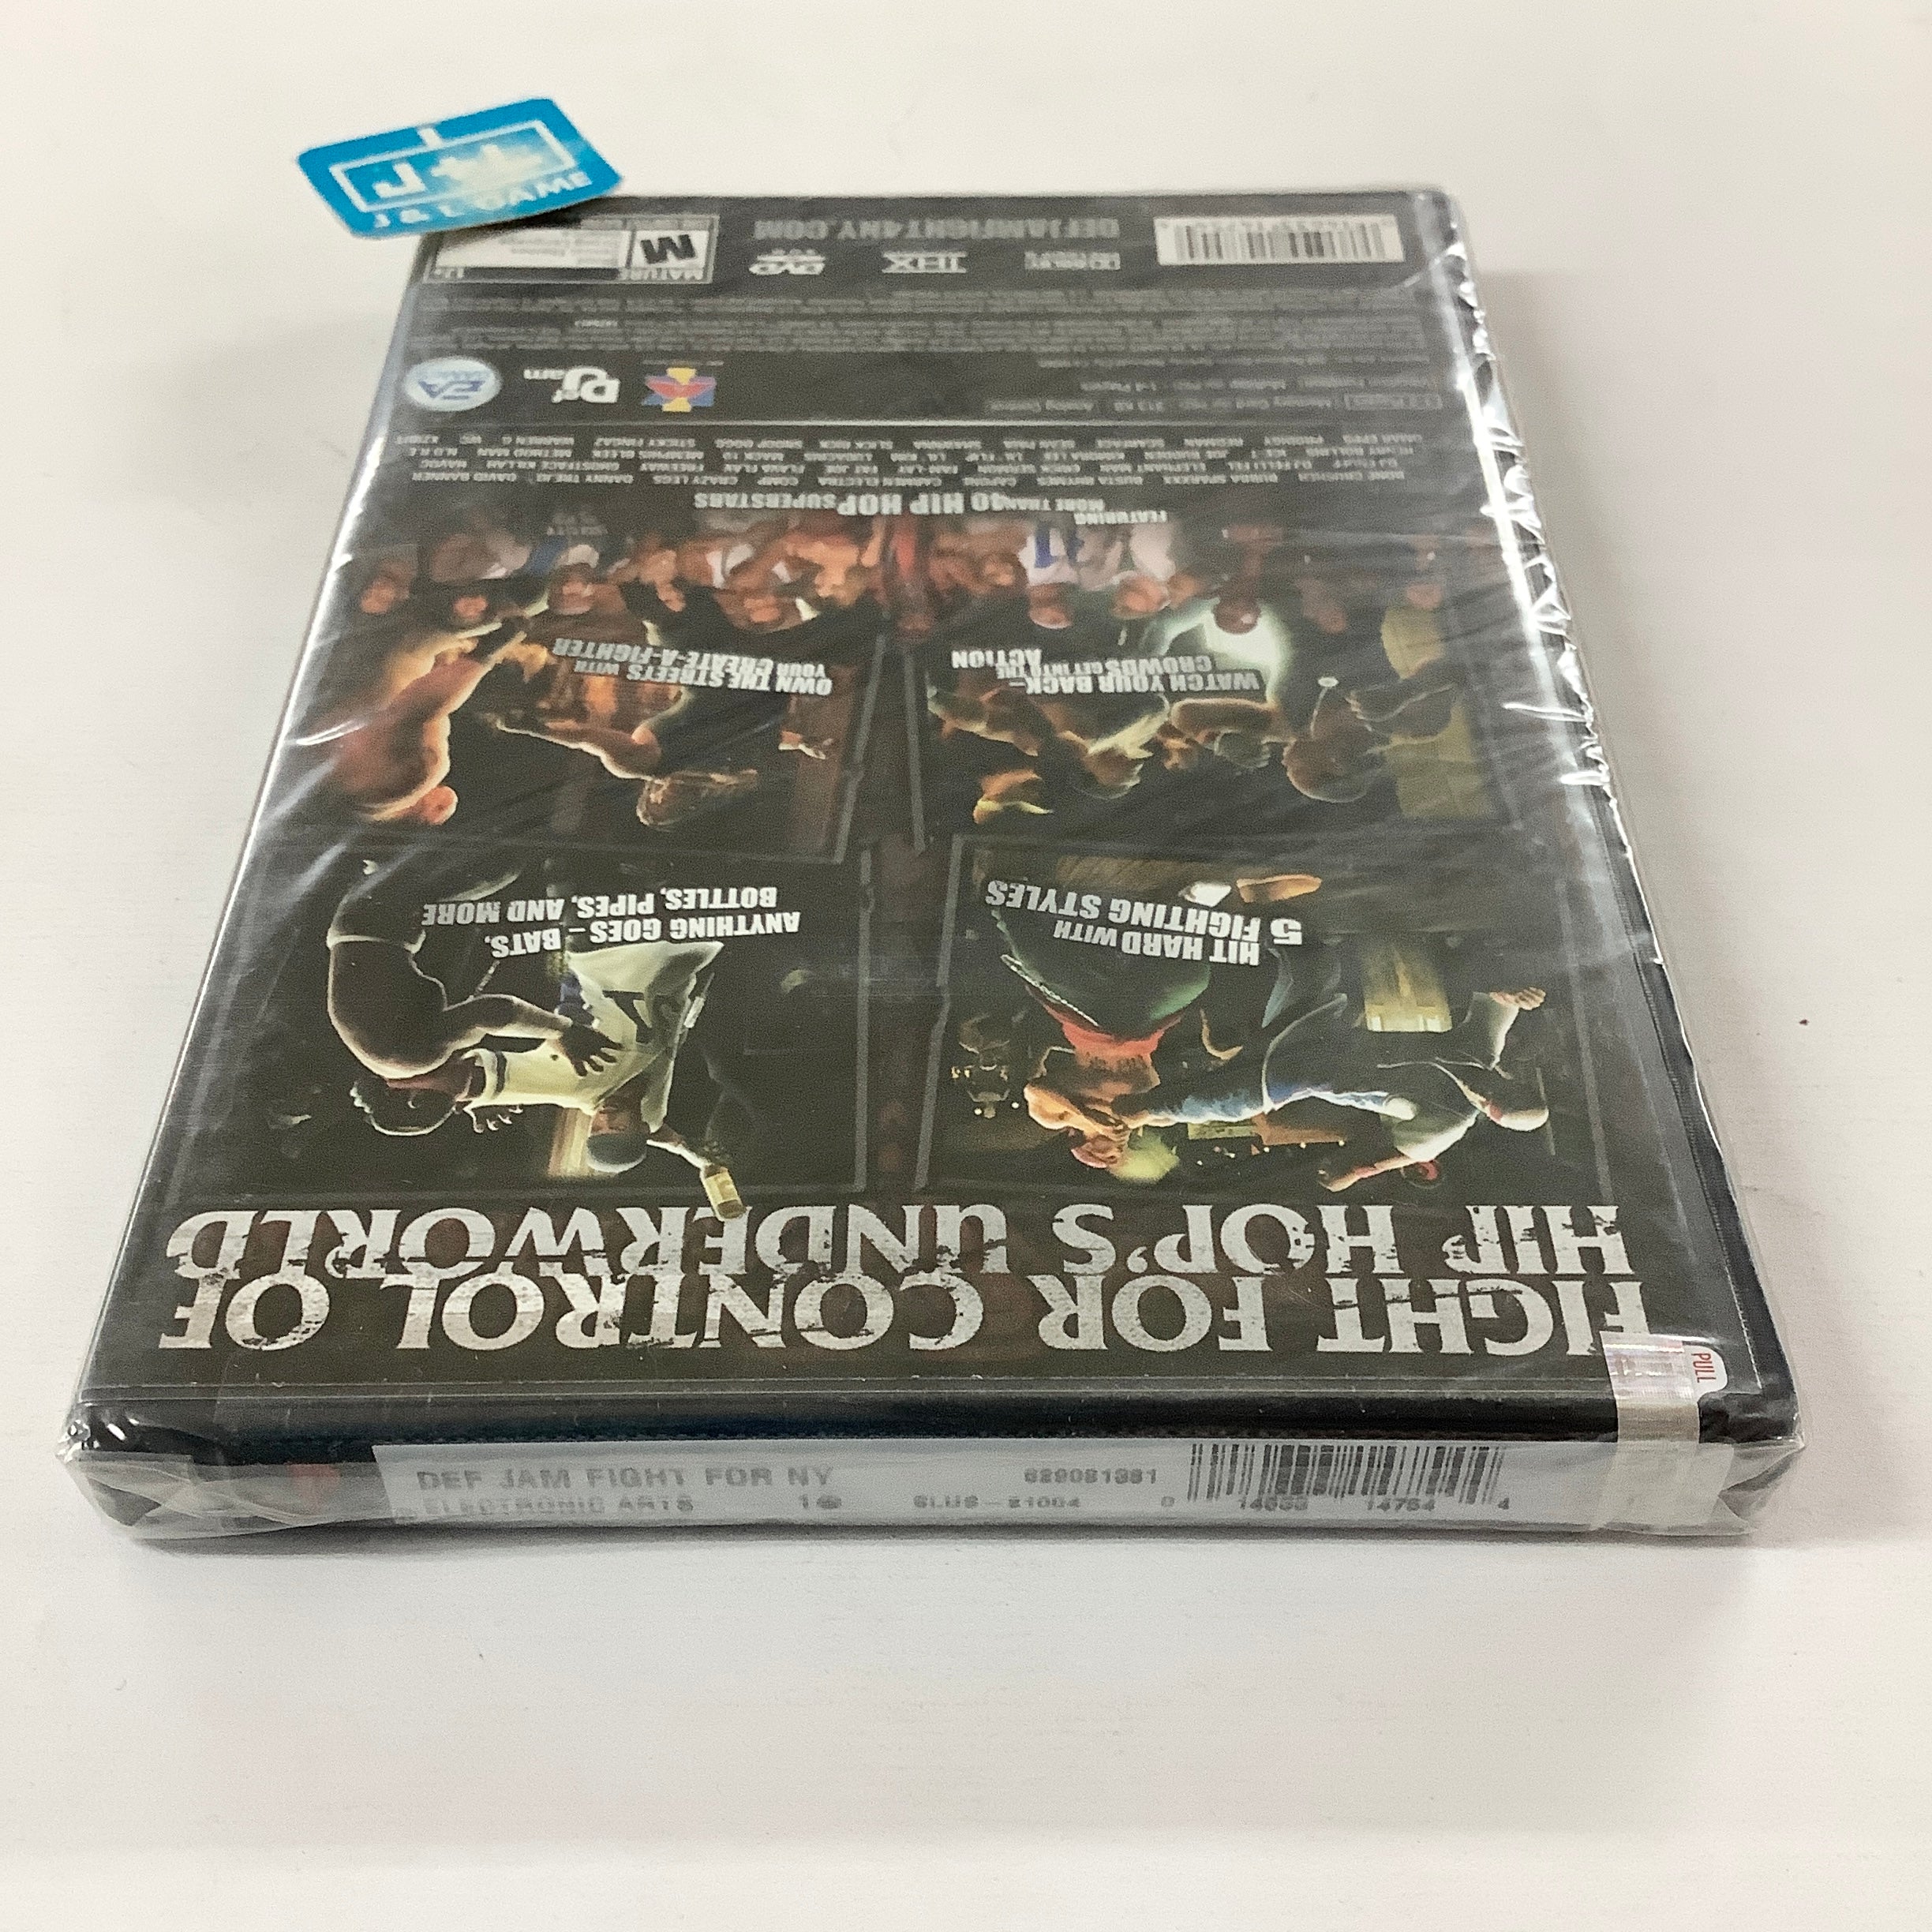 Def Jam: Fight for NY - (PS2) PlayStation 2 Video Games EA Games   